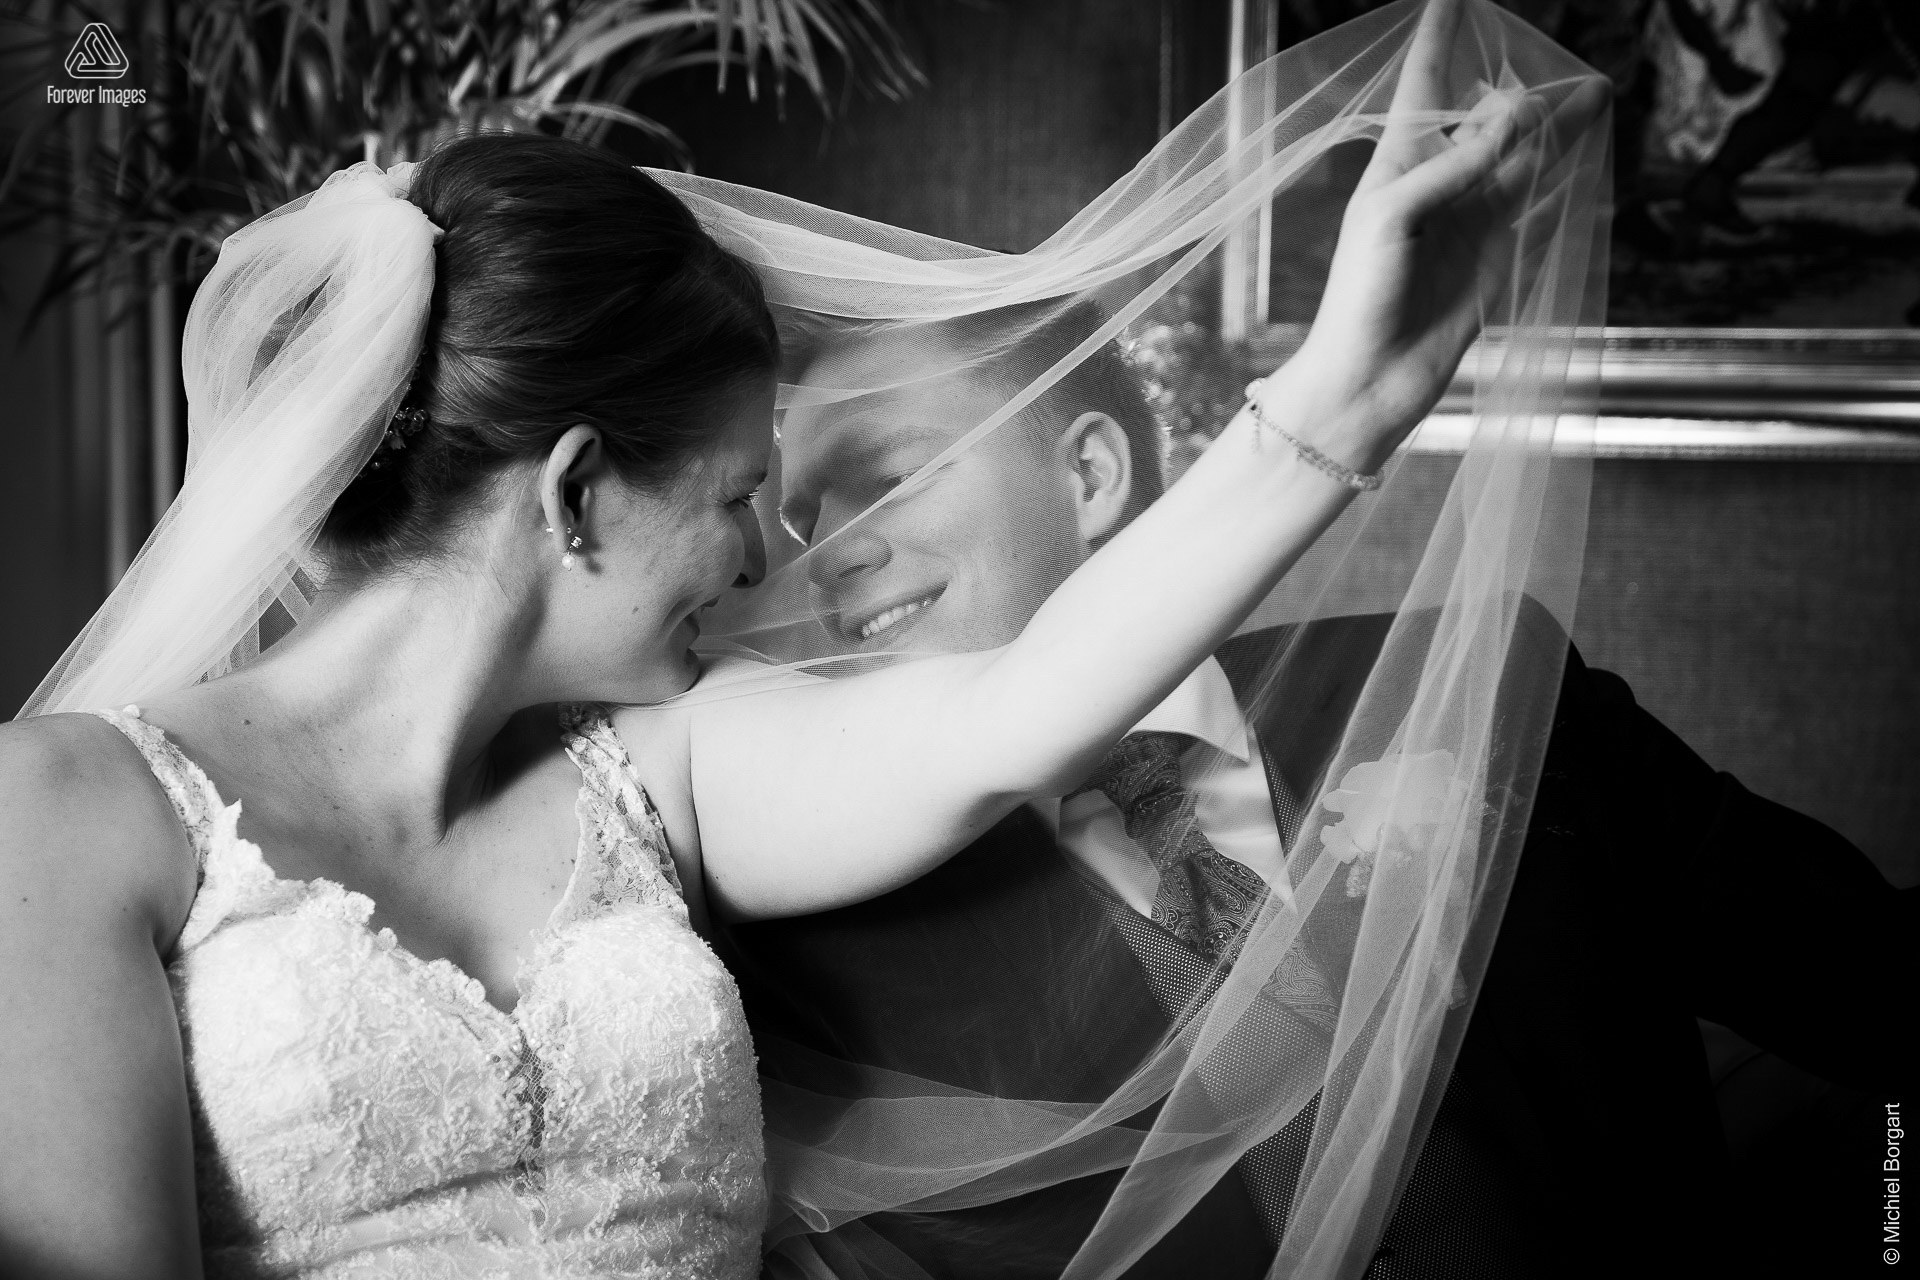 Bridal photo black and white B&W not quite yet | Aaron Emmy Kloosterhoeve | Wedding Photographer Michiel Borgart - Forever Images.